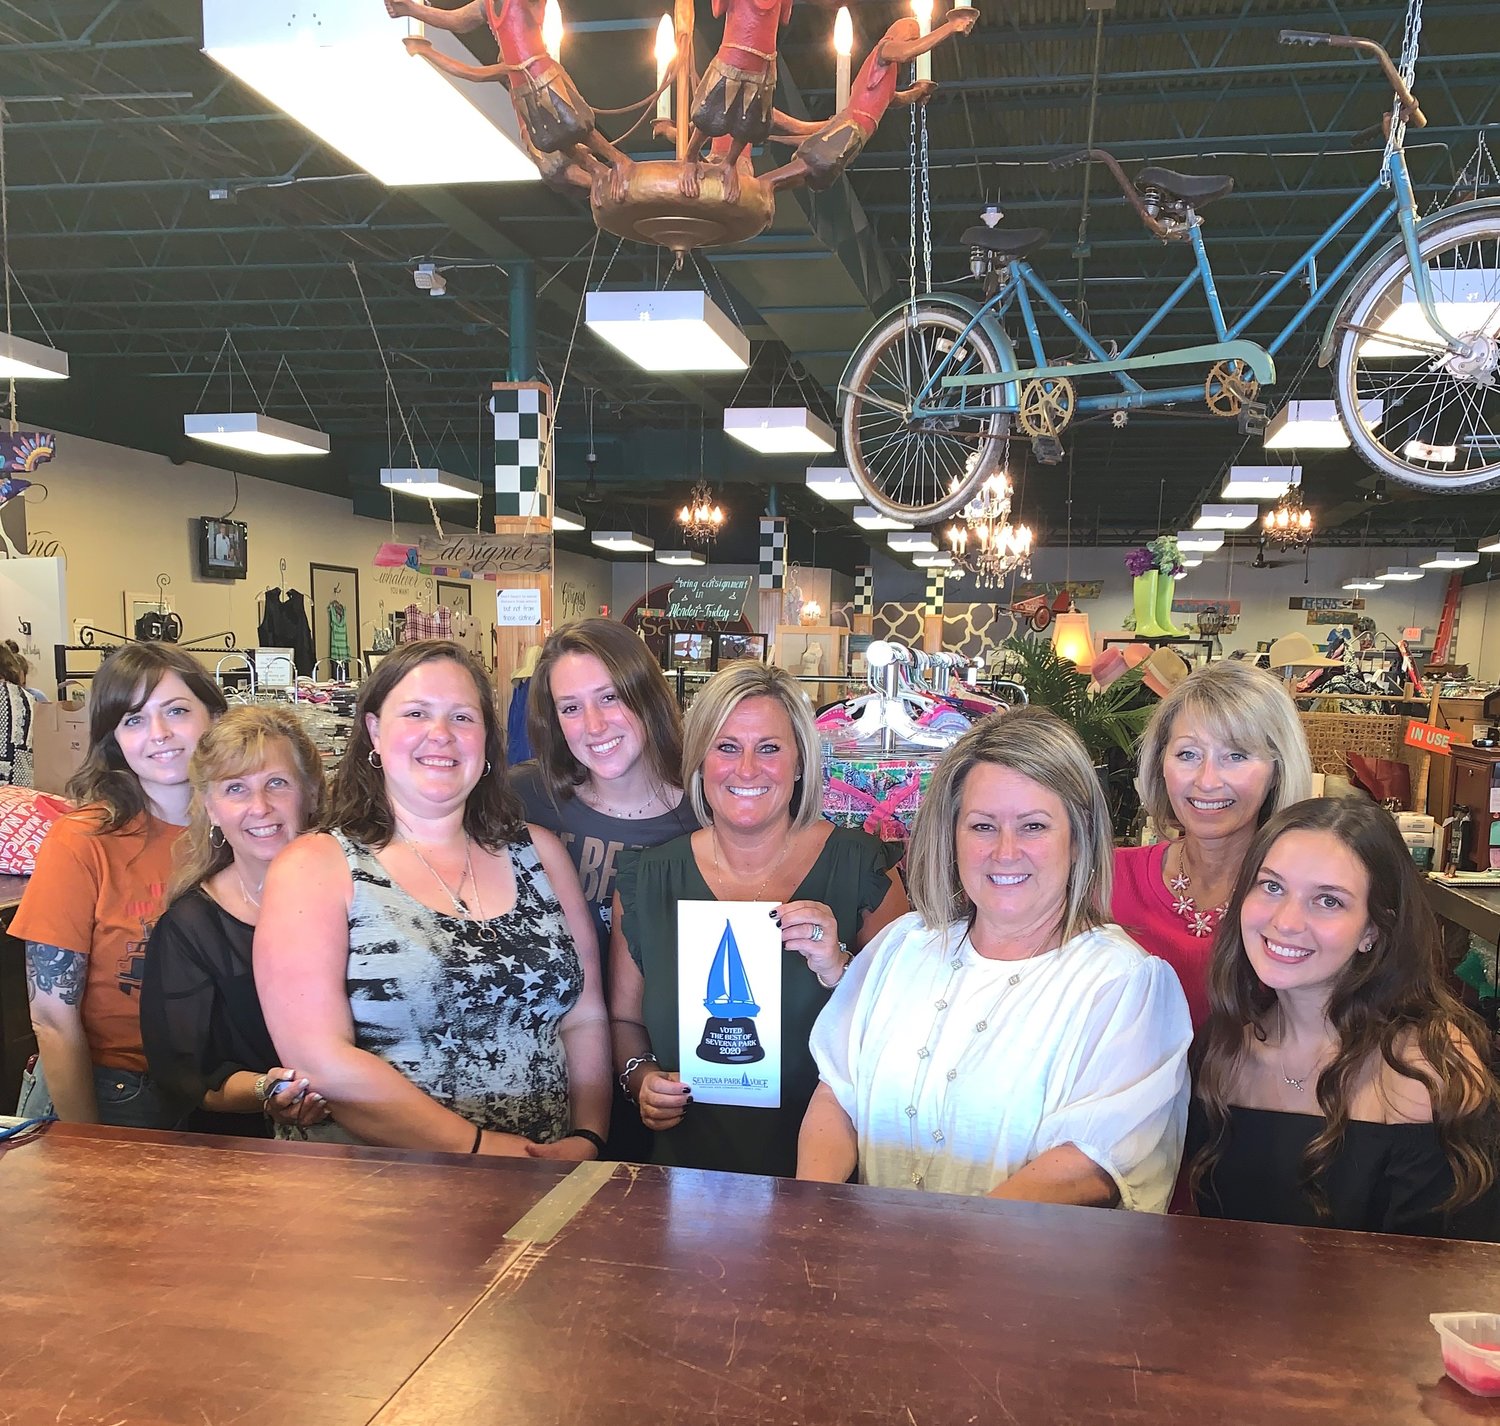 The Savvy Consignment staff was proud to see their workplace win Best Consignment Shop.